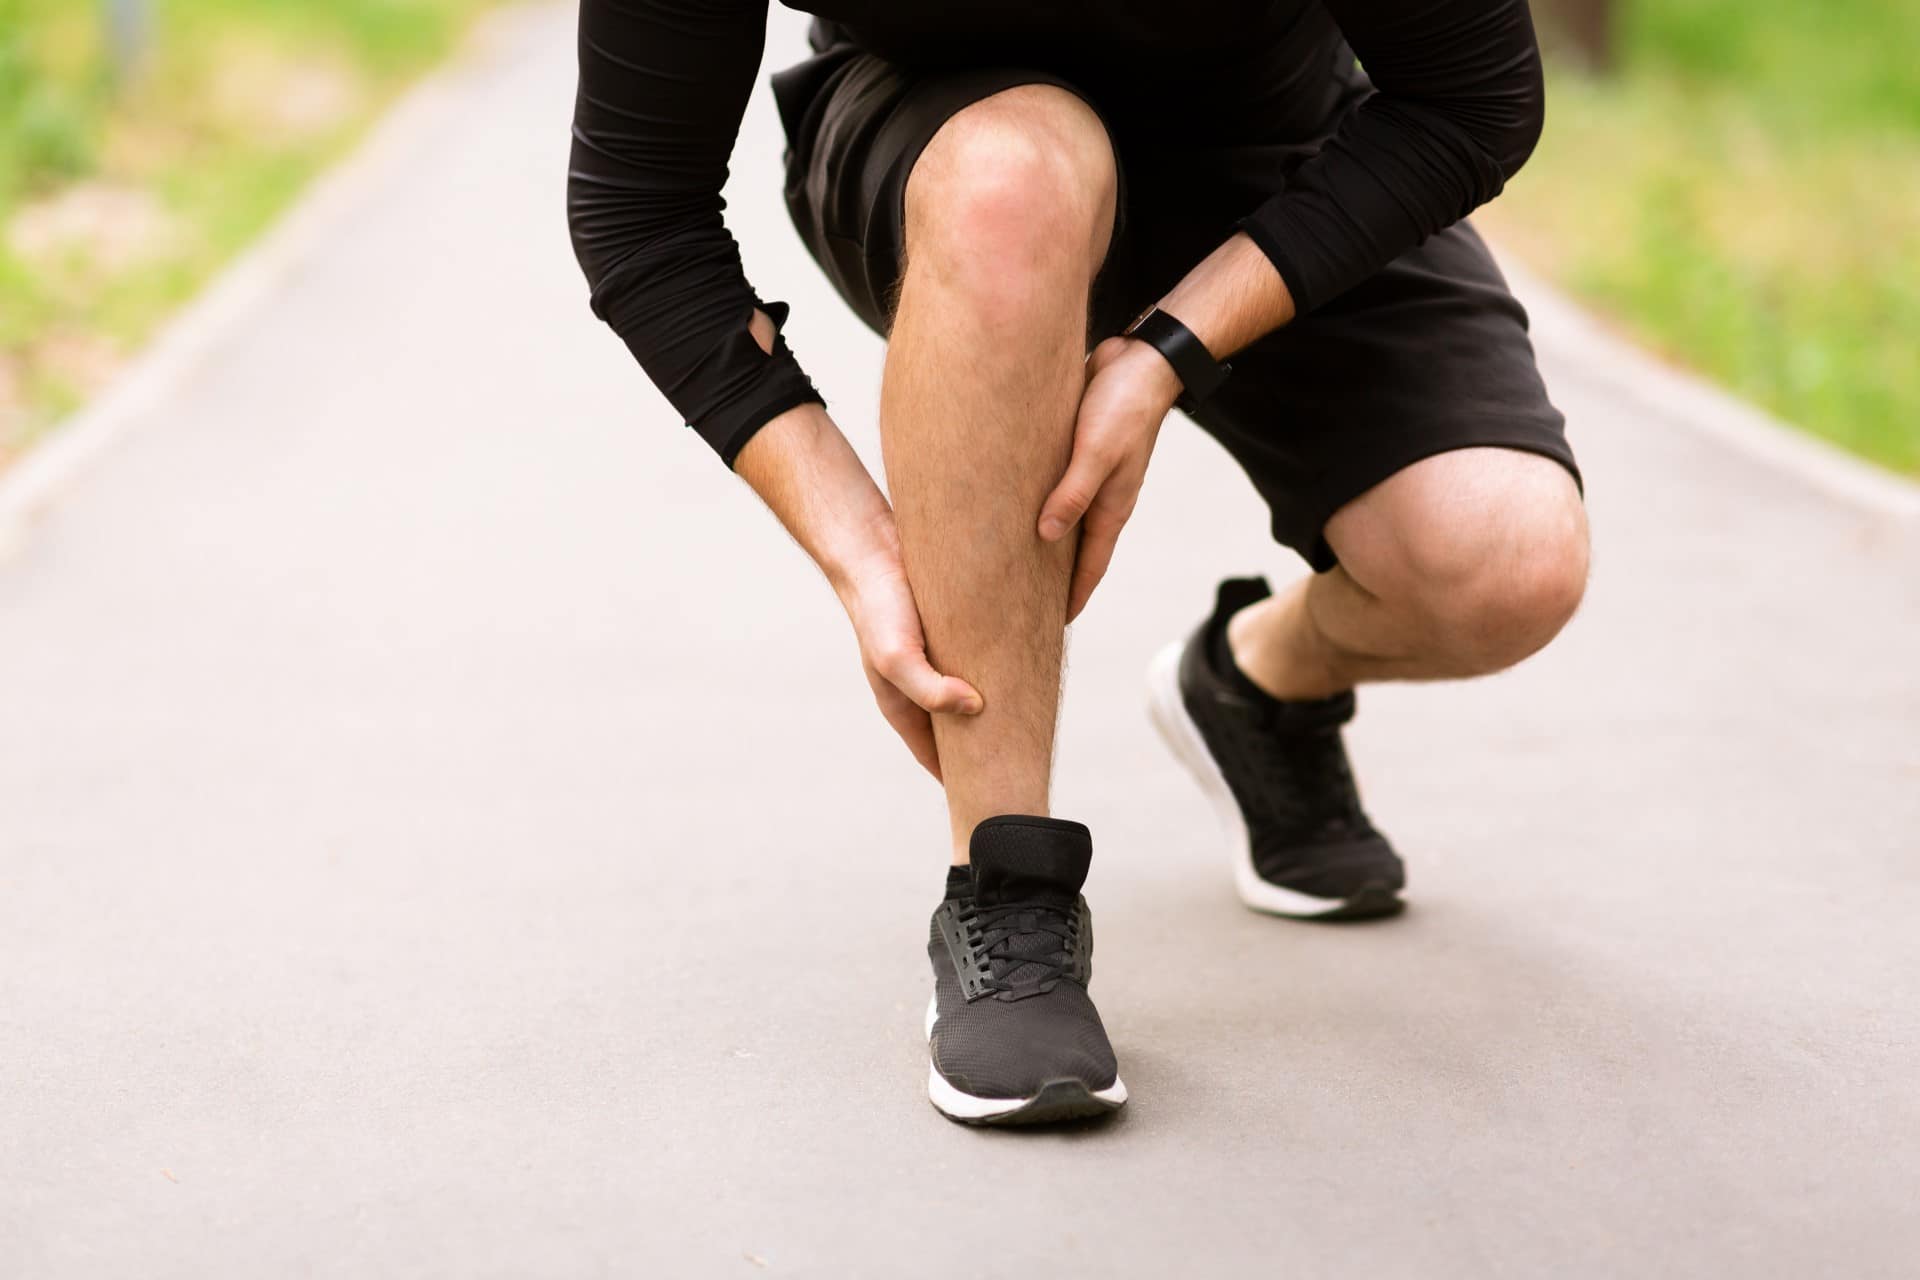 Building back following an injury | Blog Featured Image showing a calf injured runner